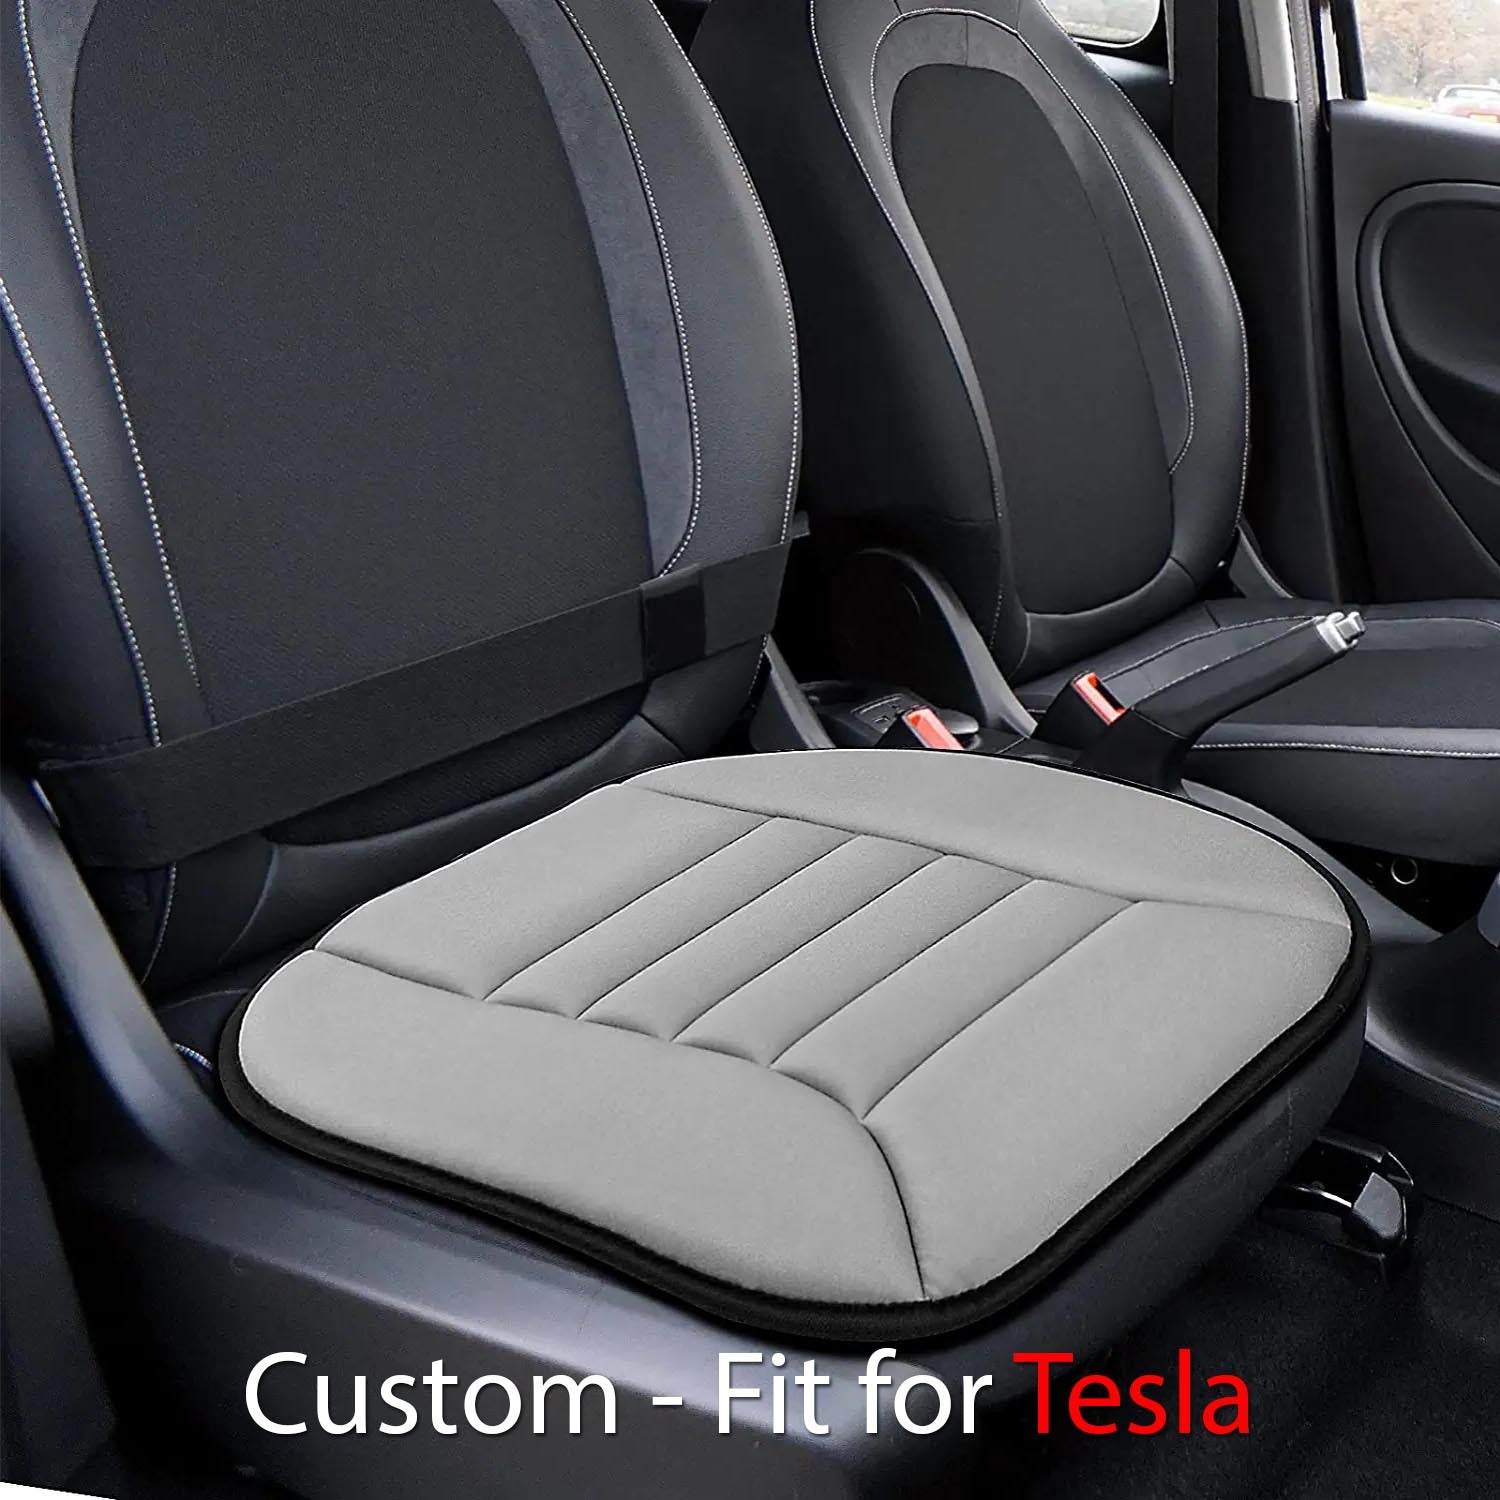 Car Seat Cushion with 1.2inch Comfort Memory Foam, Custom-Fit For Car, Seat Cushion for Car and Office Chair DLTY247